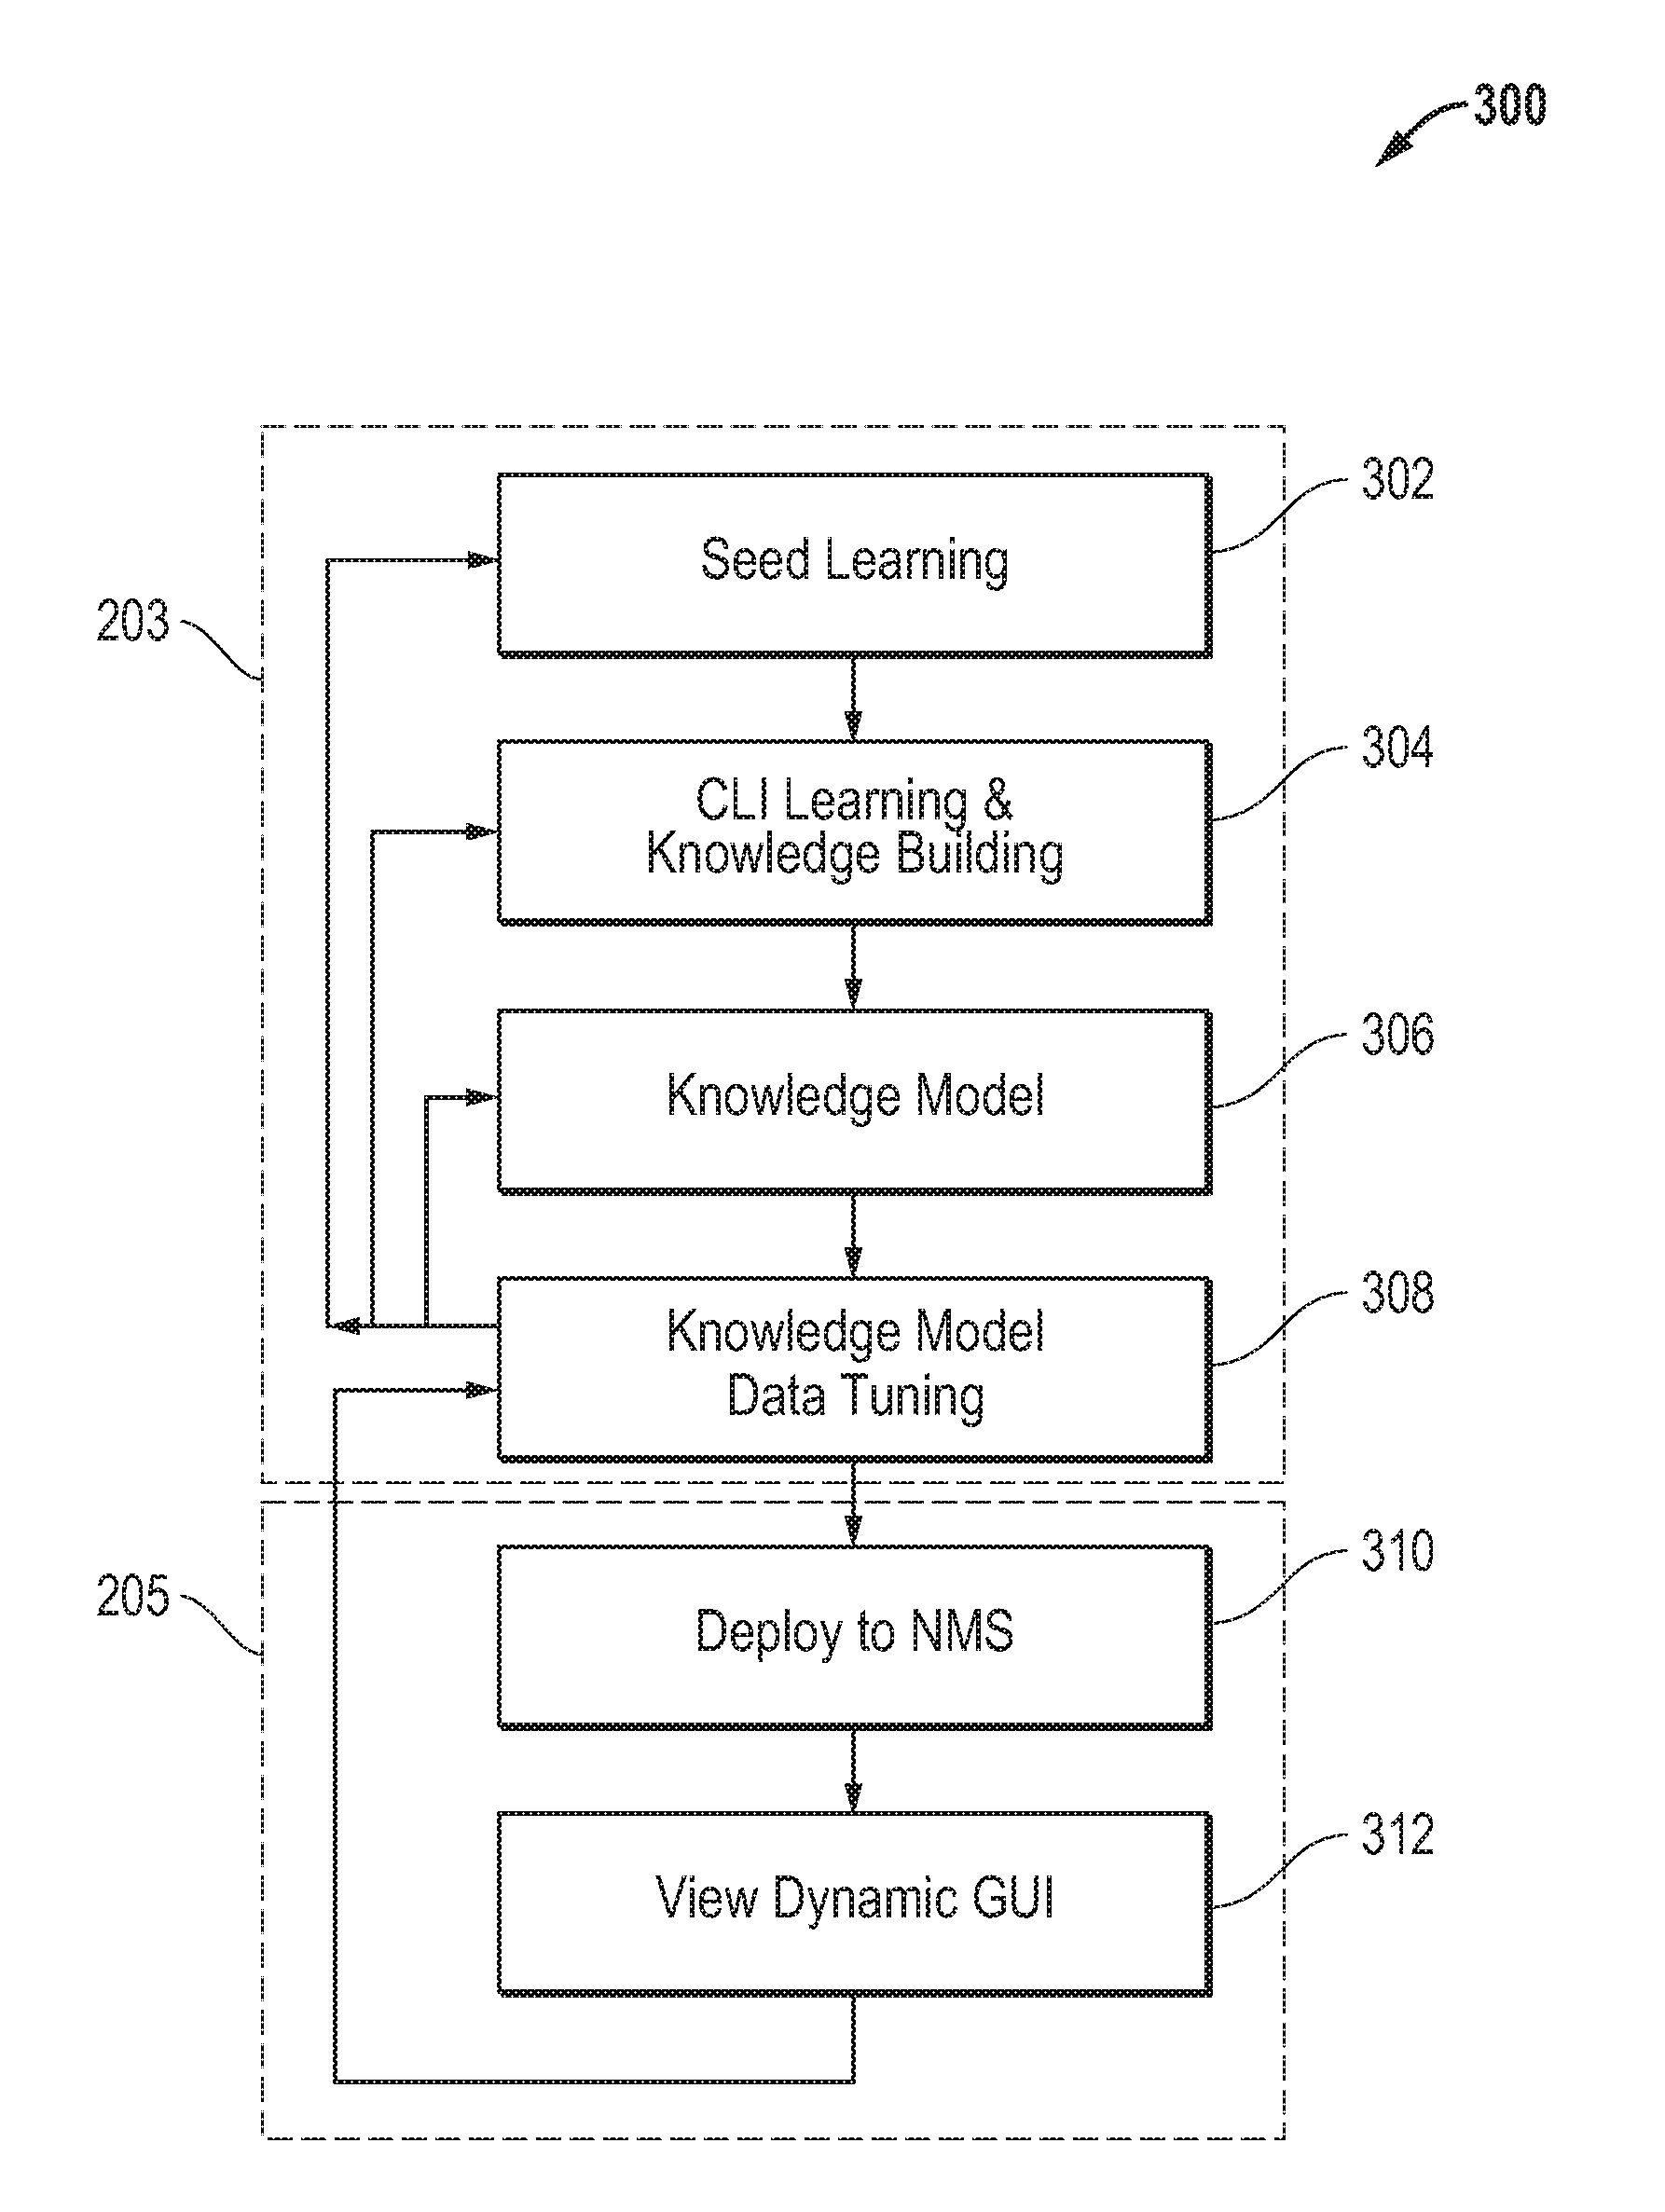 Systems and methods for analysis of network equipment command line interface (CLI) and runtime management of user interface (UI) generation for same